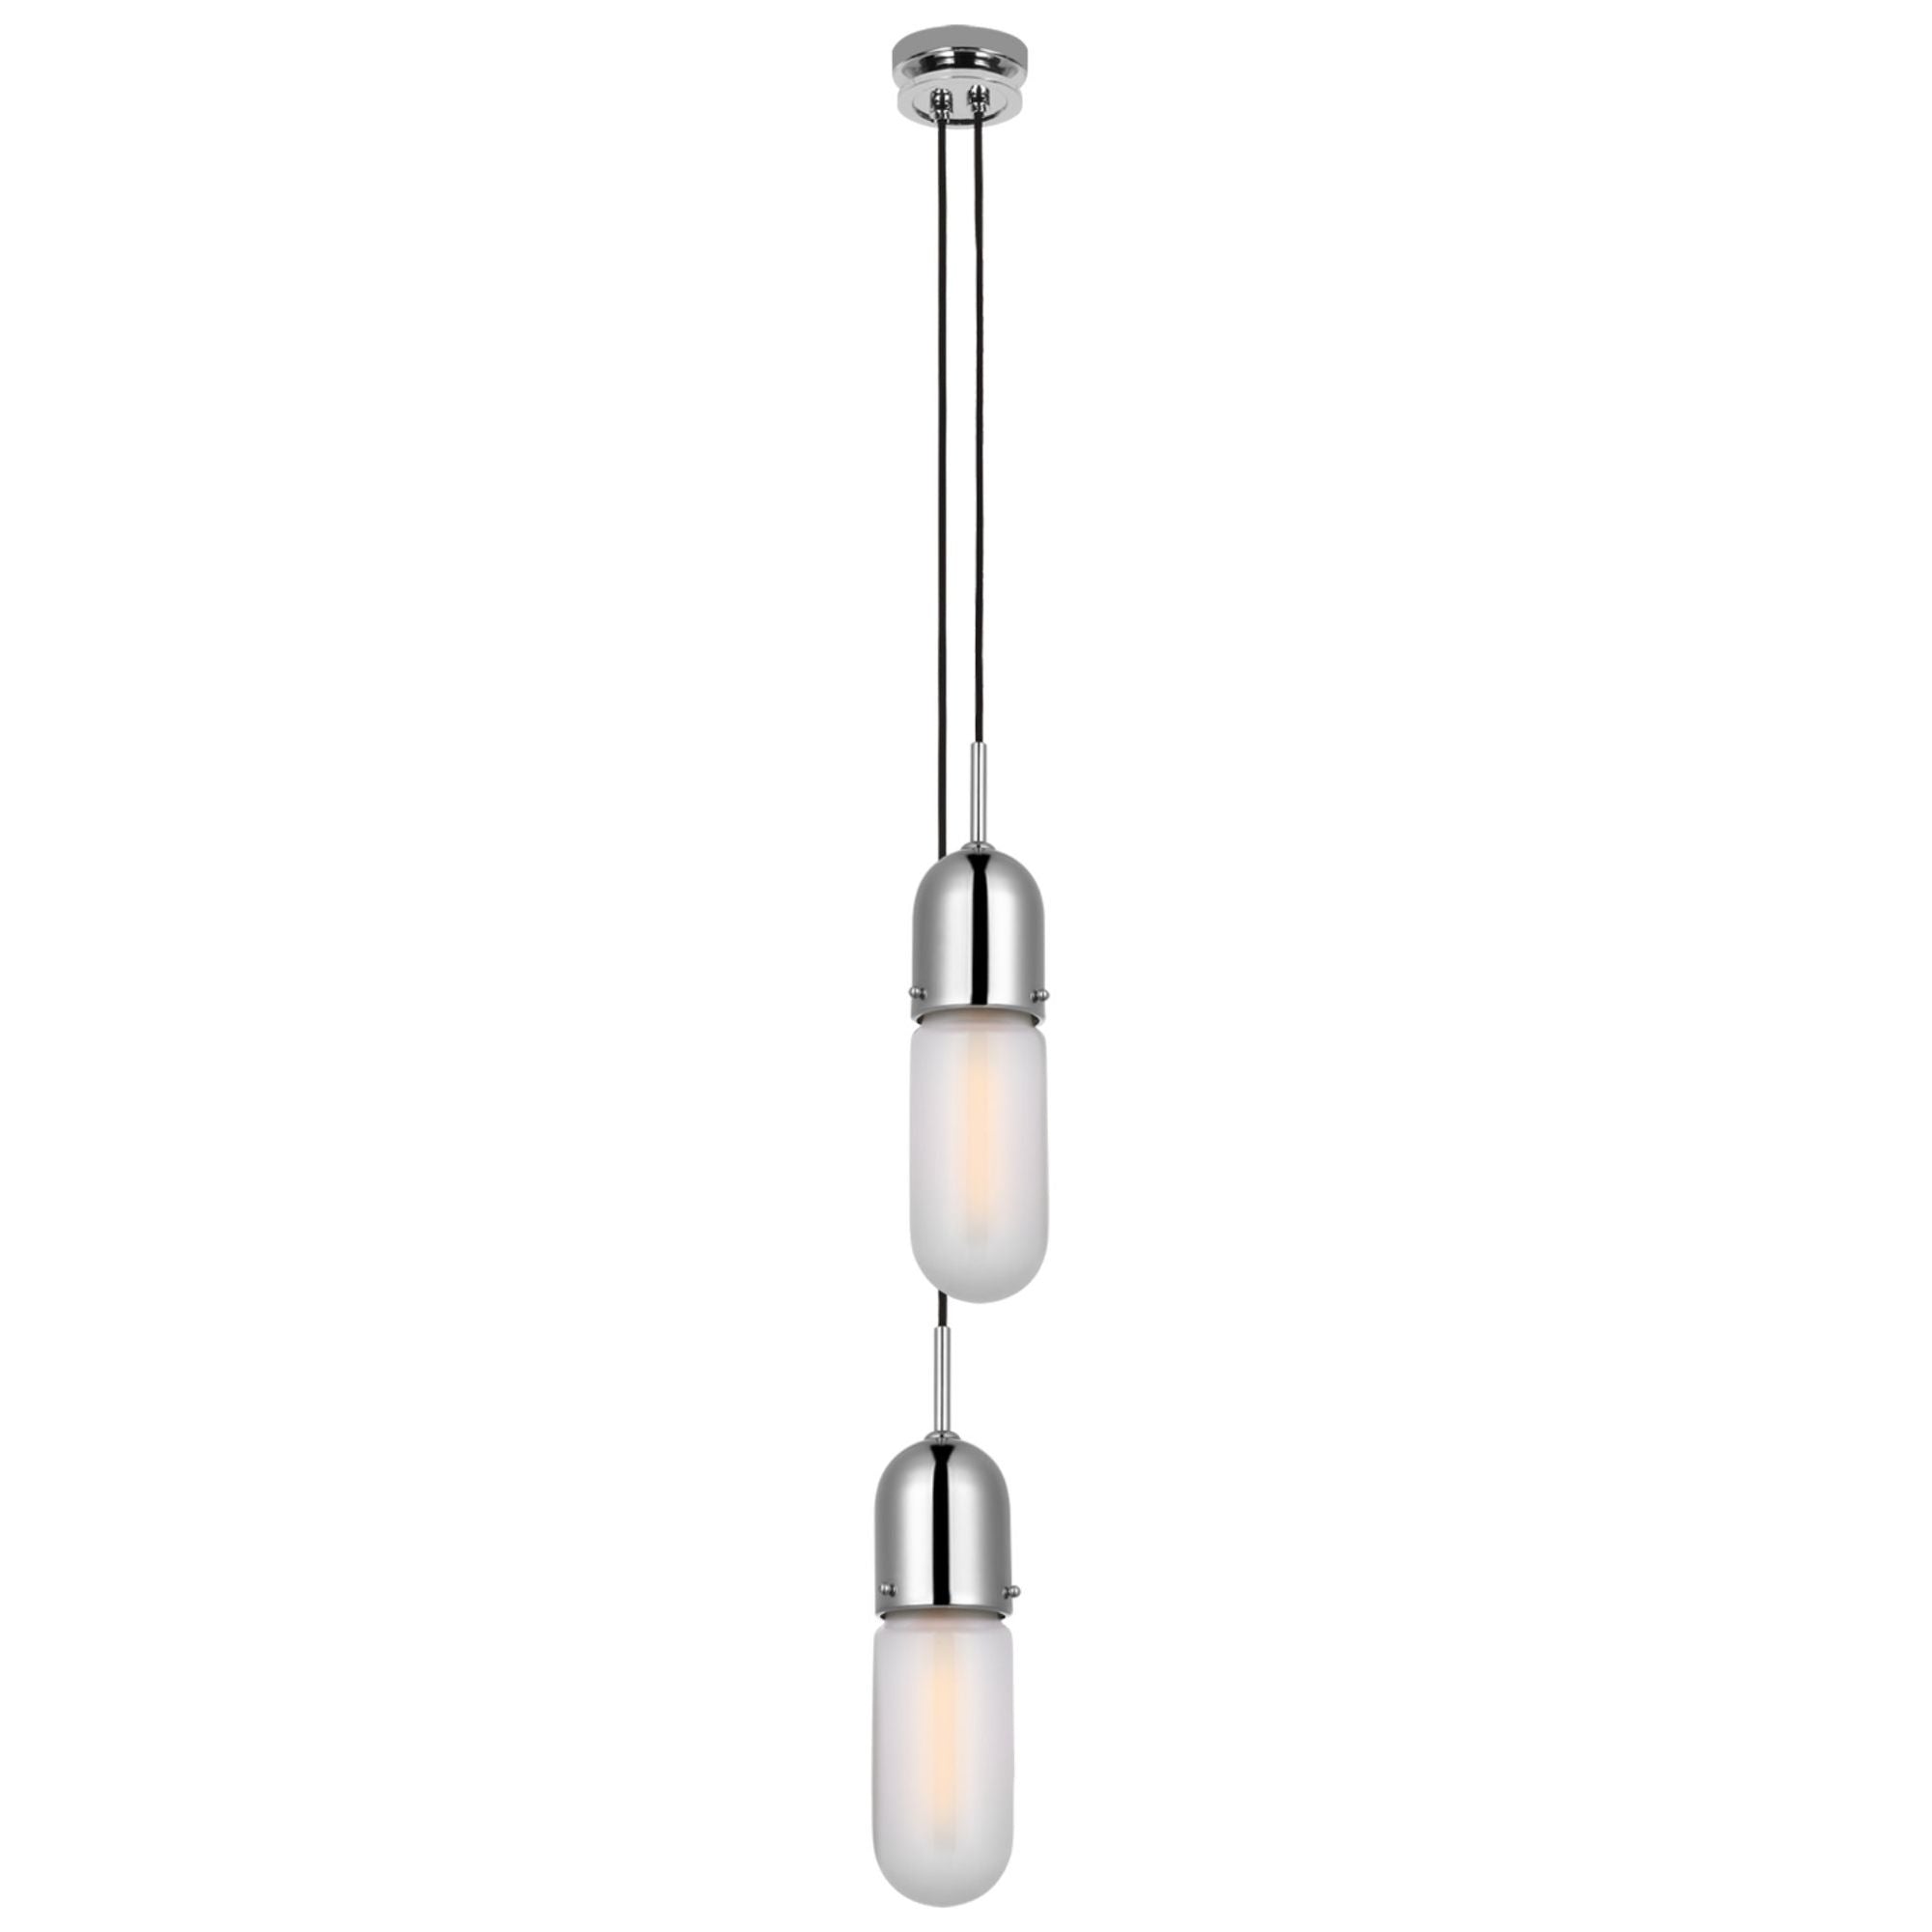 Thomas O'Brien Junio 2-Light Pendant in Polished Nickel with Frosted Glass